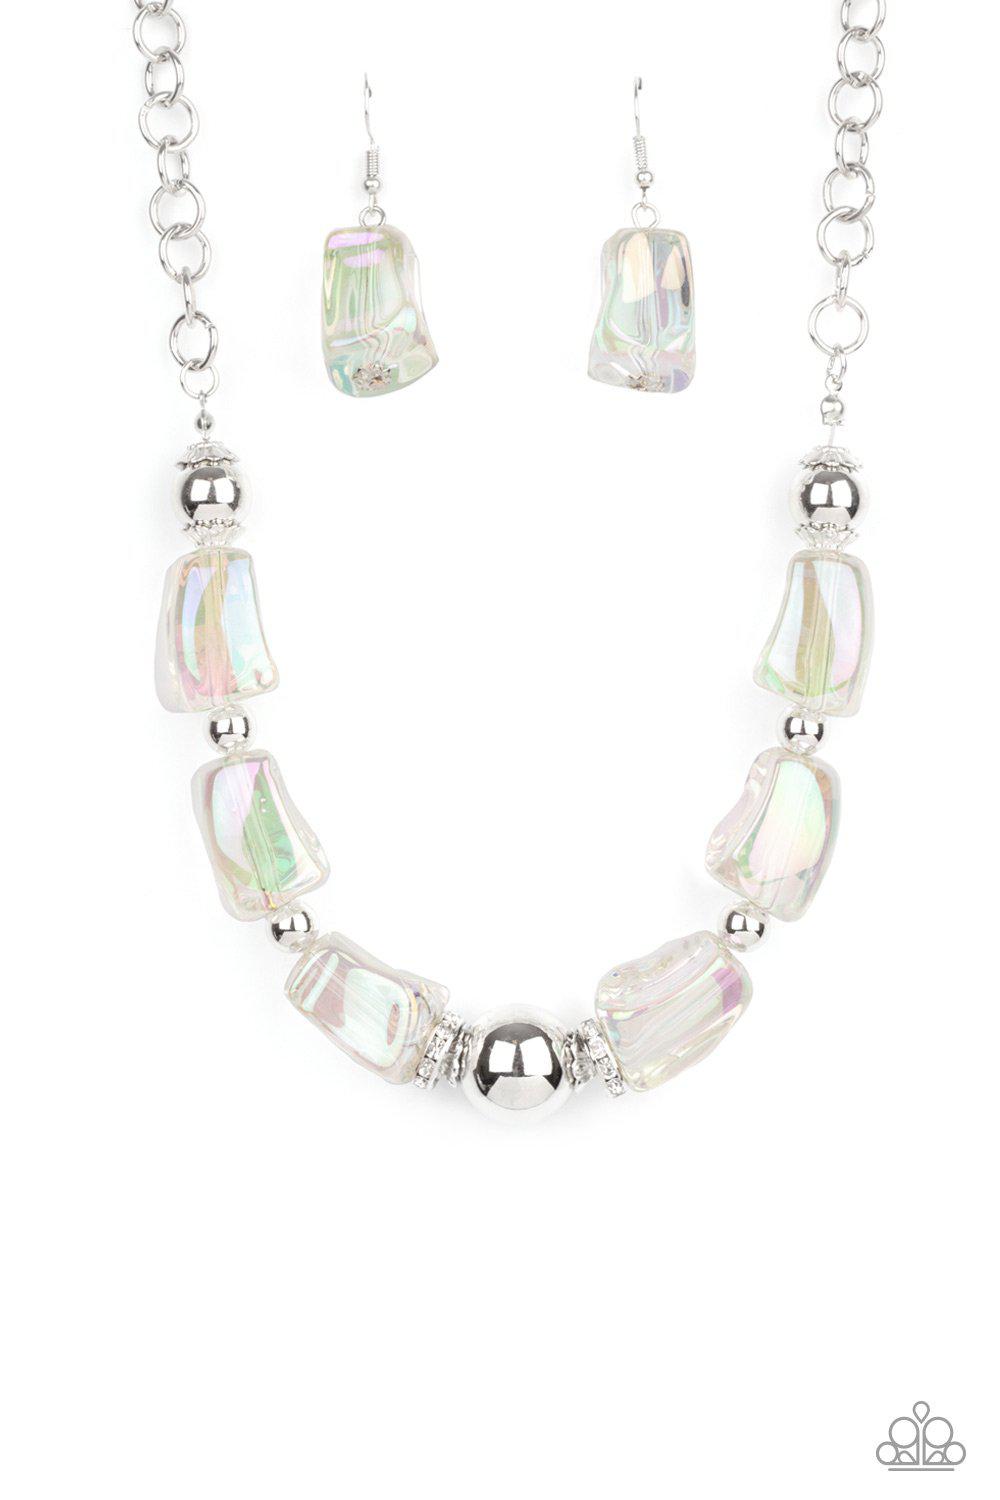 Iridescently Ice Queen Multi Iridescent Bead Necklace - Paparazzi Accessories- lightbox - CarasShop.com - $5 Jewelry by Cara Jewels